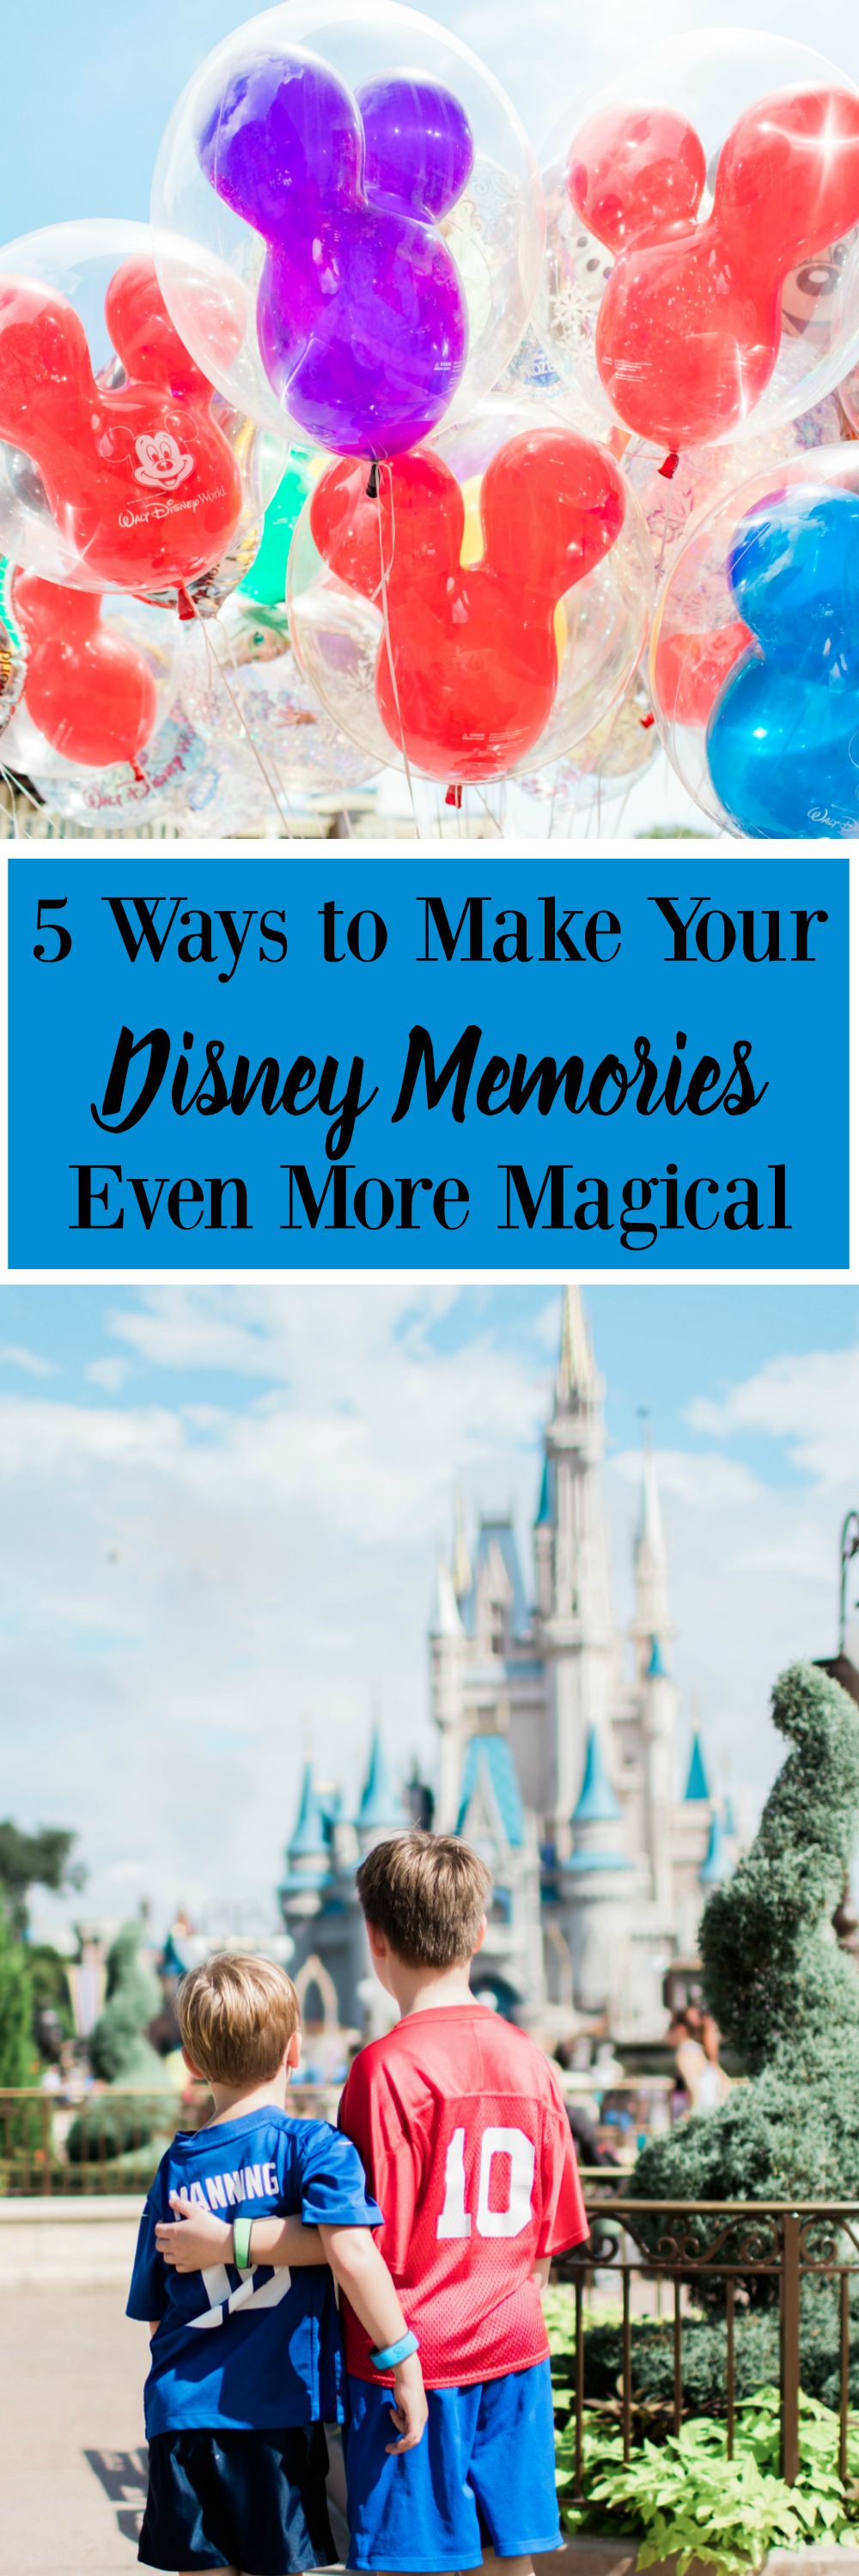 five-ways-to-make-your-disney-memories-even-more-magical-2